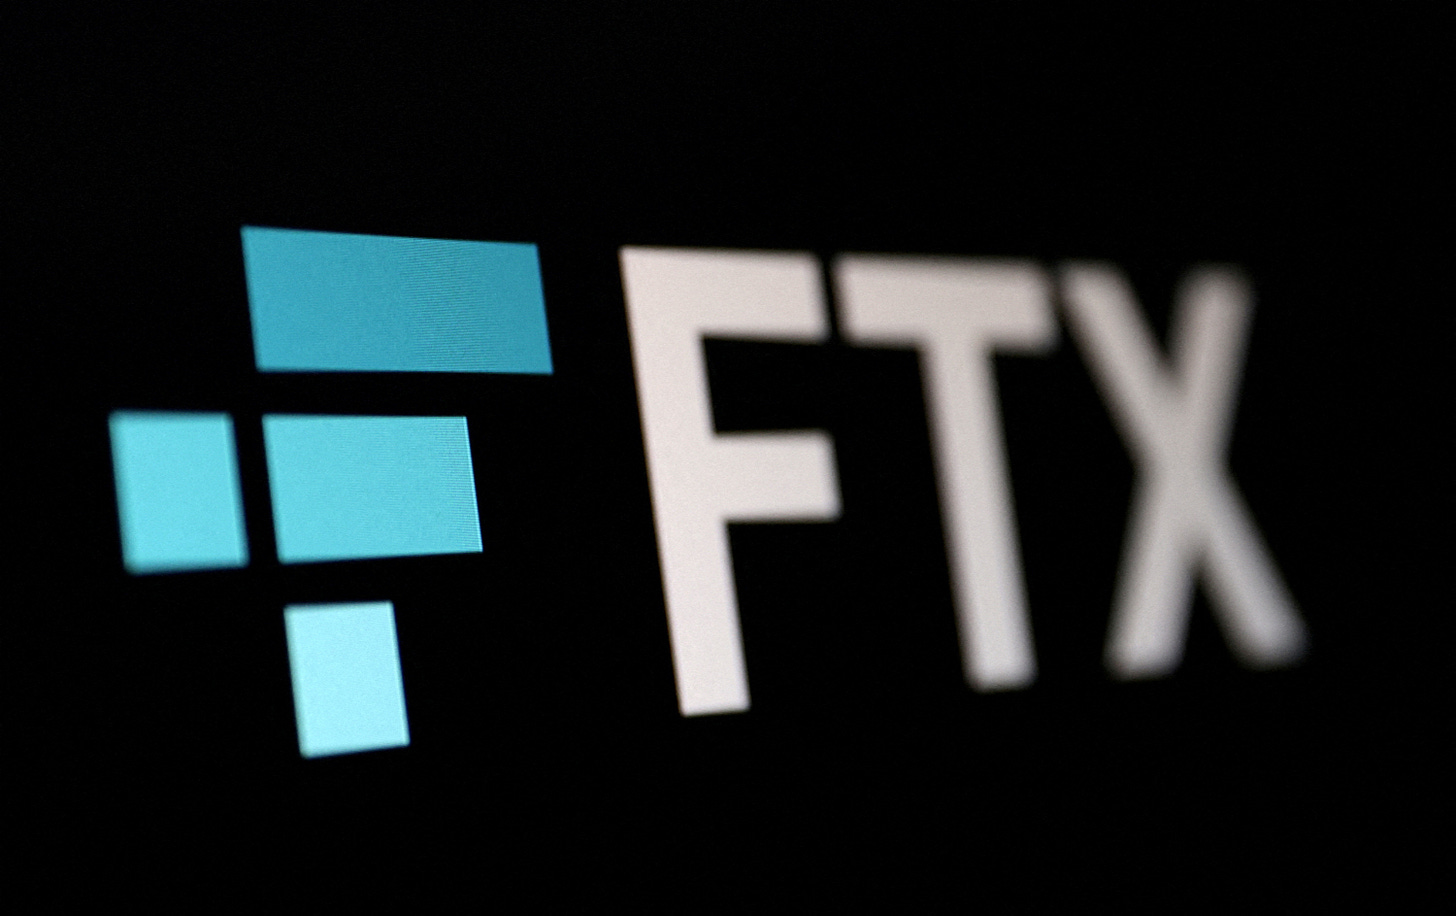 Further details emerge on FTX bankruptcy and missing funds | Reuters